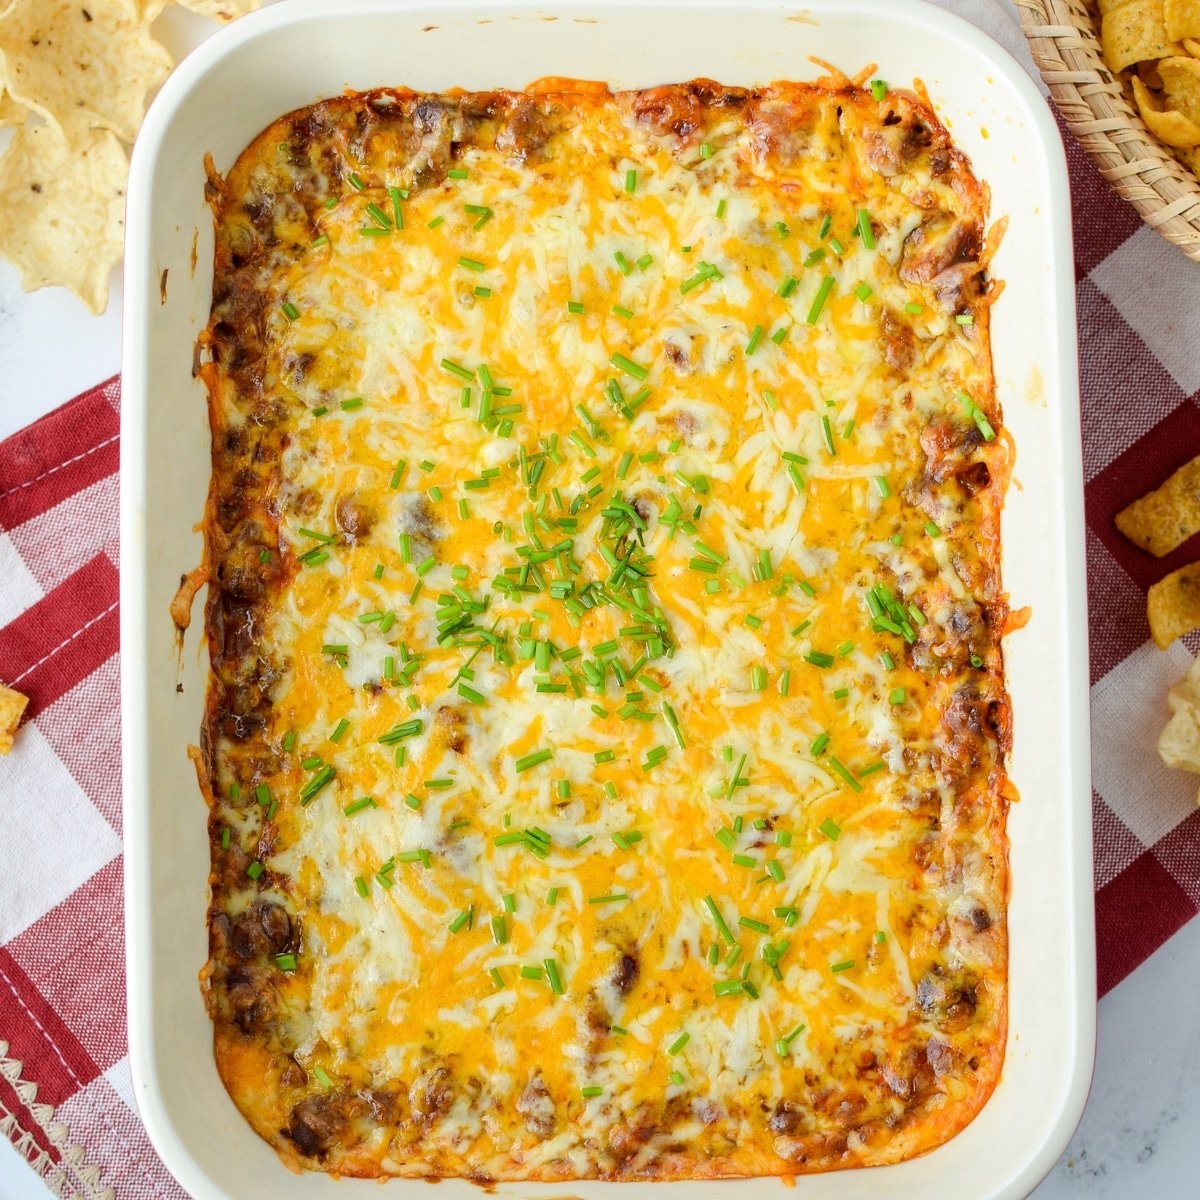 Easy Chili Cheese Dip (4 Ingredients) - Dash for Dinner